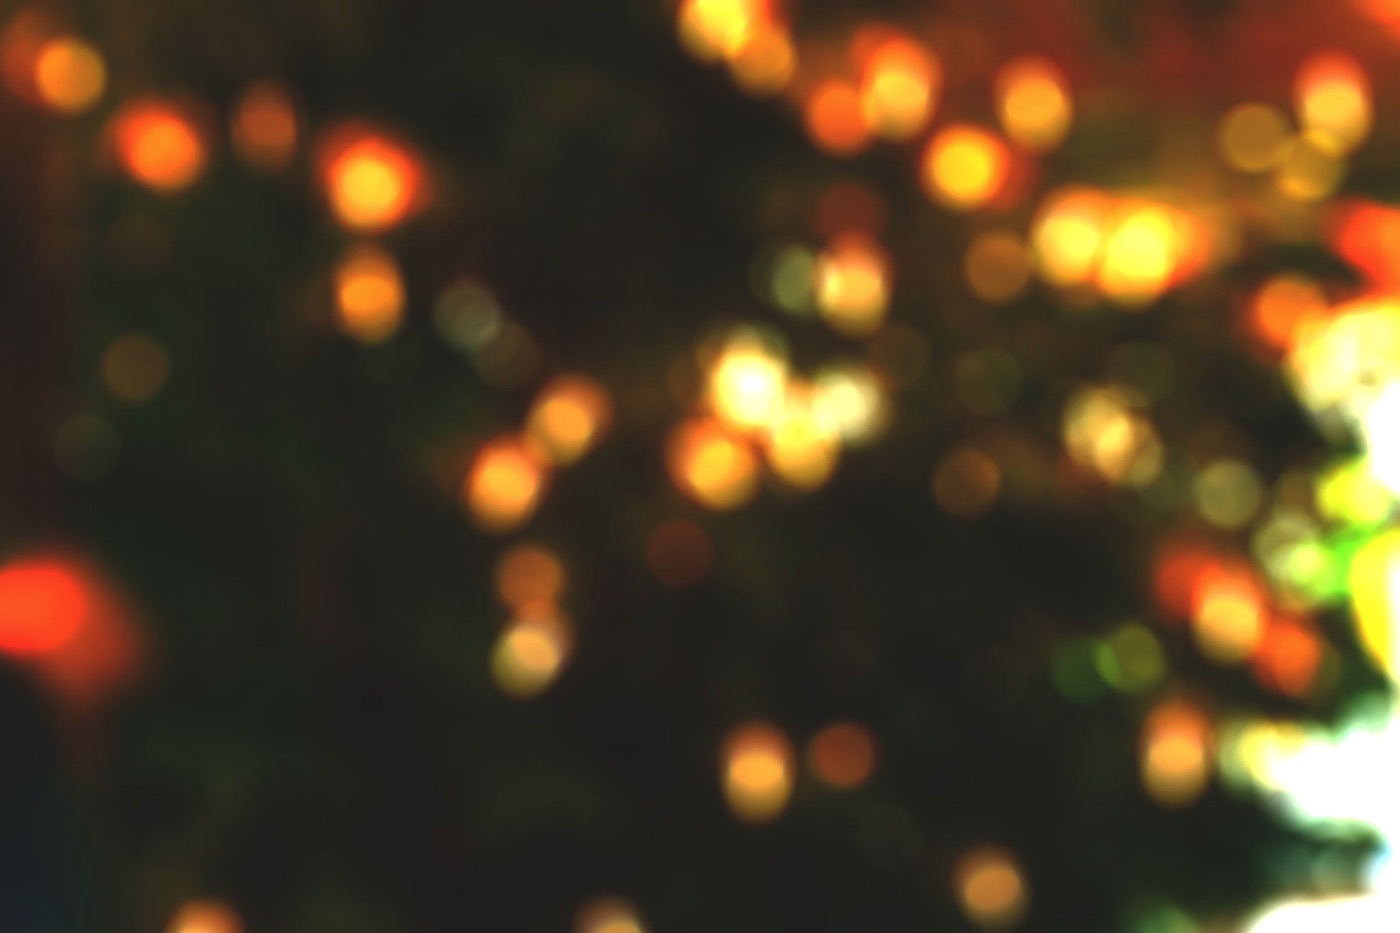 Photo of blurred lights at Christmas.